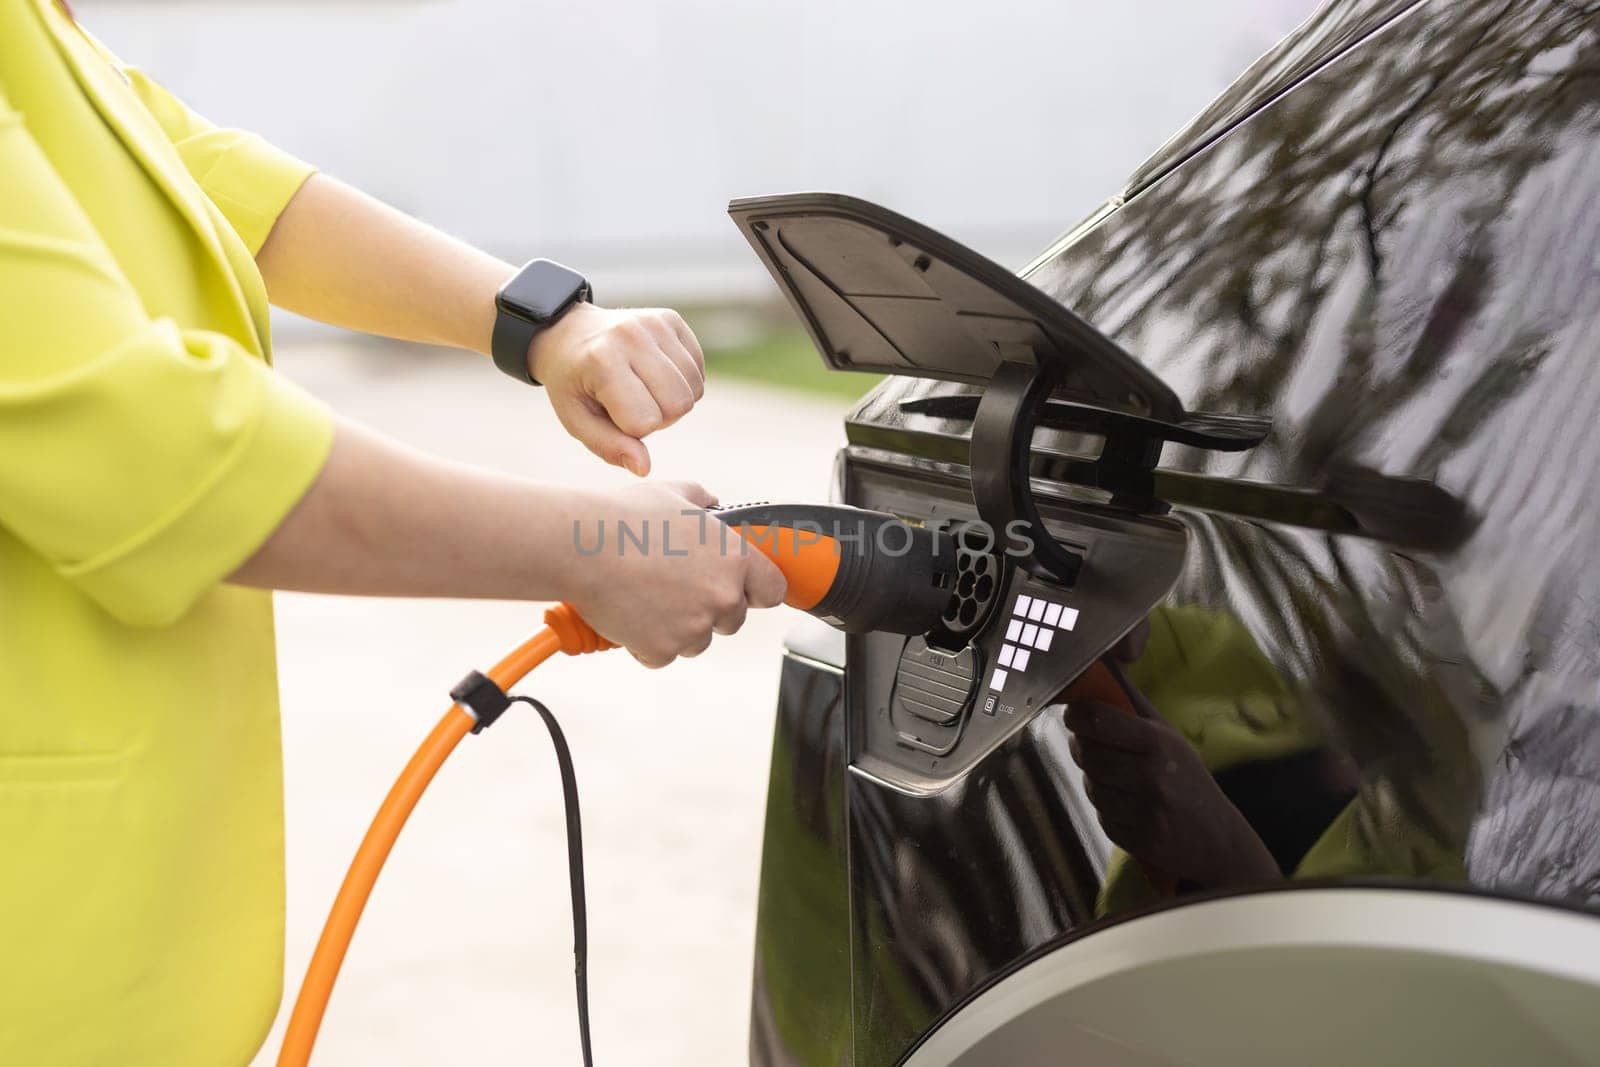 Female plugging an electric car or EV at electric charging station. Woman hands attaching power cable supply to charge electric or EV car using app on wearable smart watch by uflypro